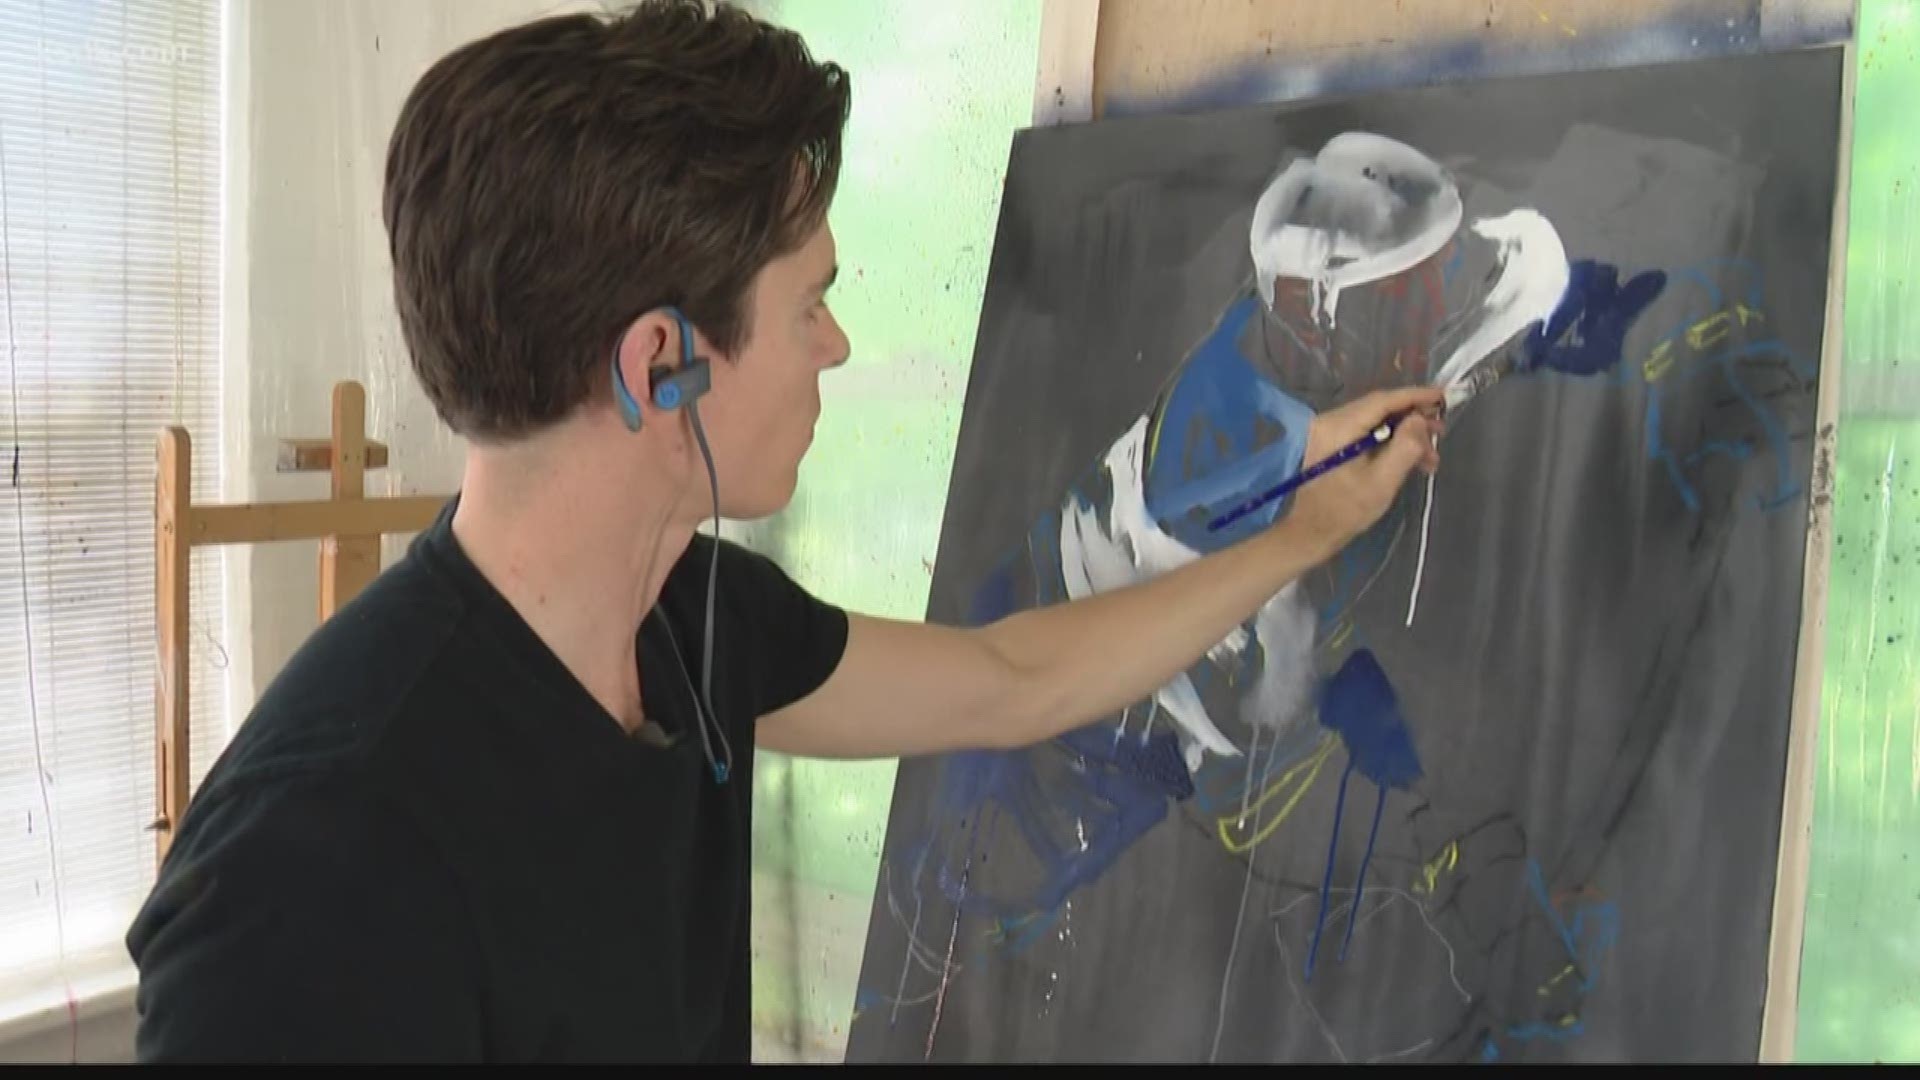 Local artist Kyle Lucks puts his brush to work to cheer on the Blues. He creates pieces featuring the team, freezing moments from the historic run at the Stanley Cup.